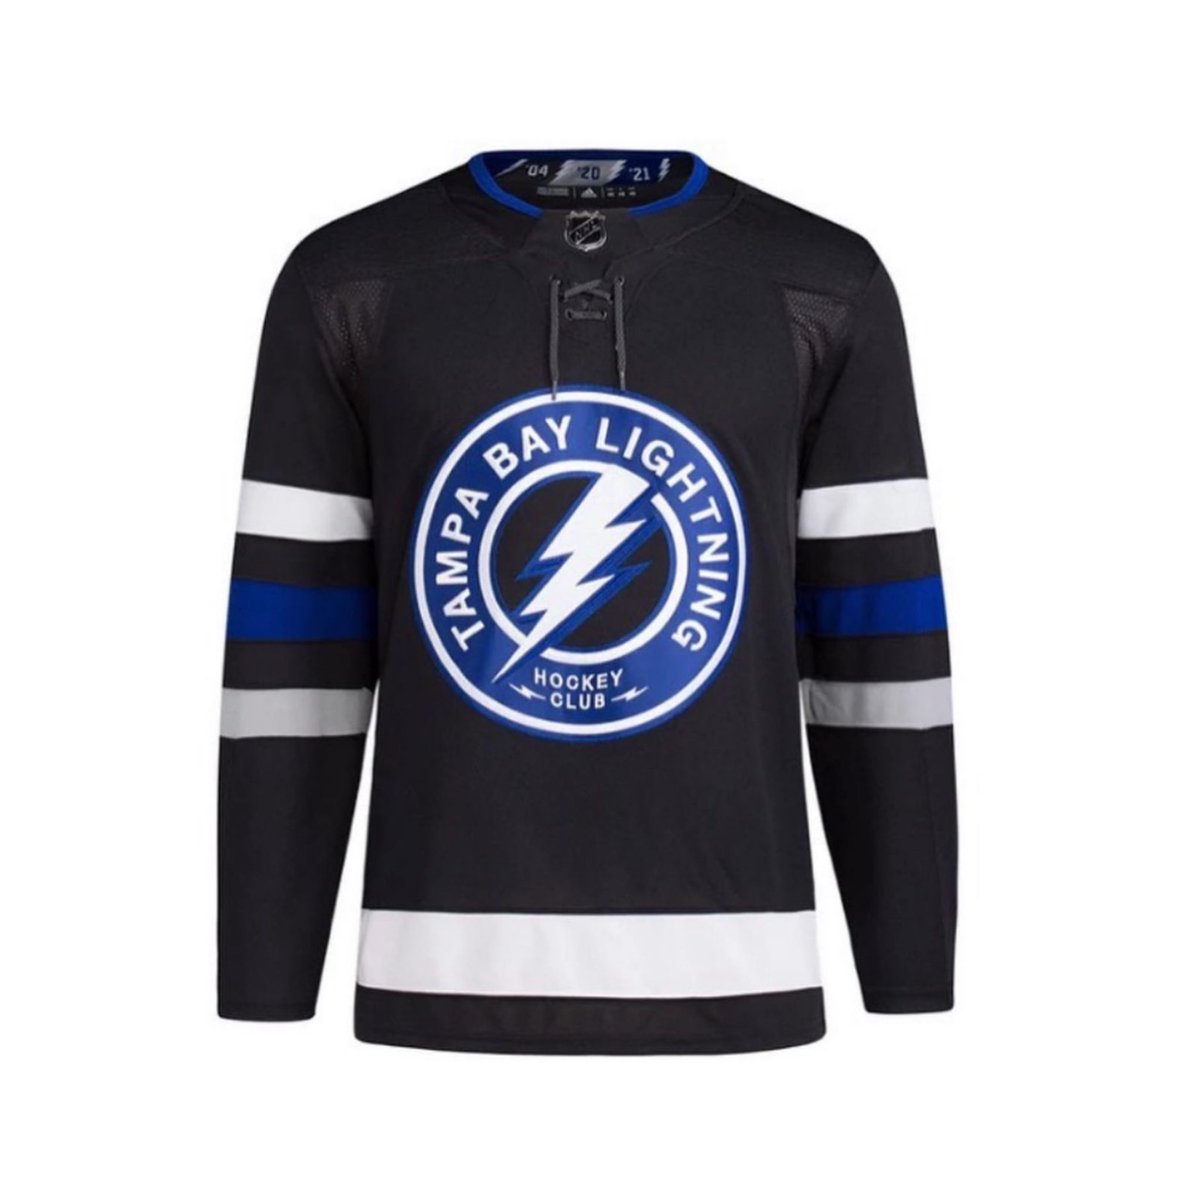 🚨TAMPA 3RD JERSEY GIVEAWAY🚨 We’ve decided to giveaway the NEW authentic Adidas #TampaBayLightning 3rd jersey w/ & player you want on the back. ⚡️ To enter: 1. FOLLOW @HKYJersey 2. LIKE ❤️ & RT 🔄 this tweet. 3. Reply with your size & player you want! Good luck! 🔵⚪️⚫️